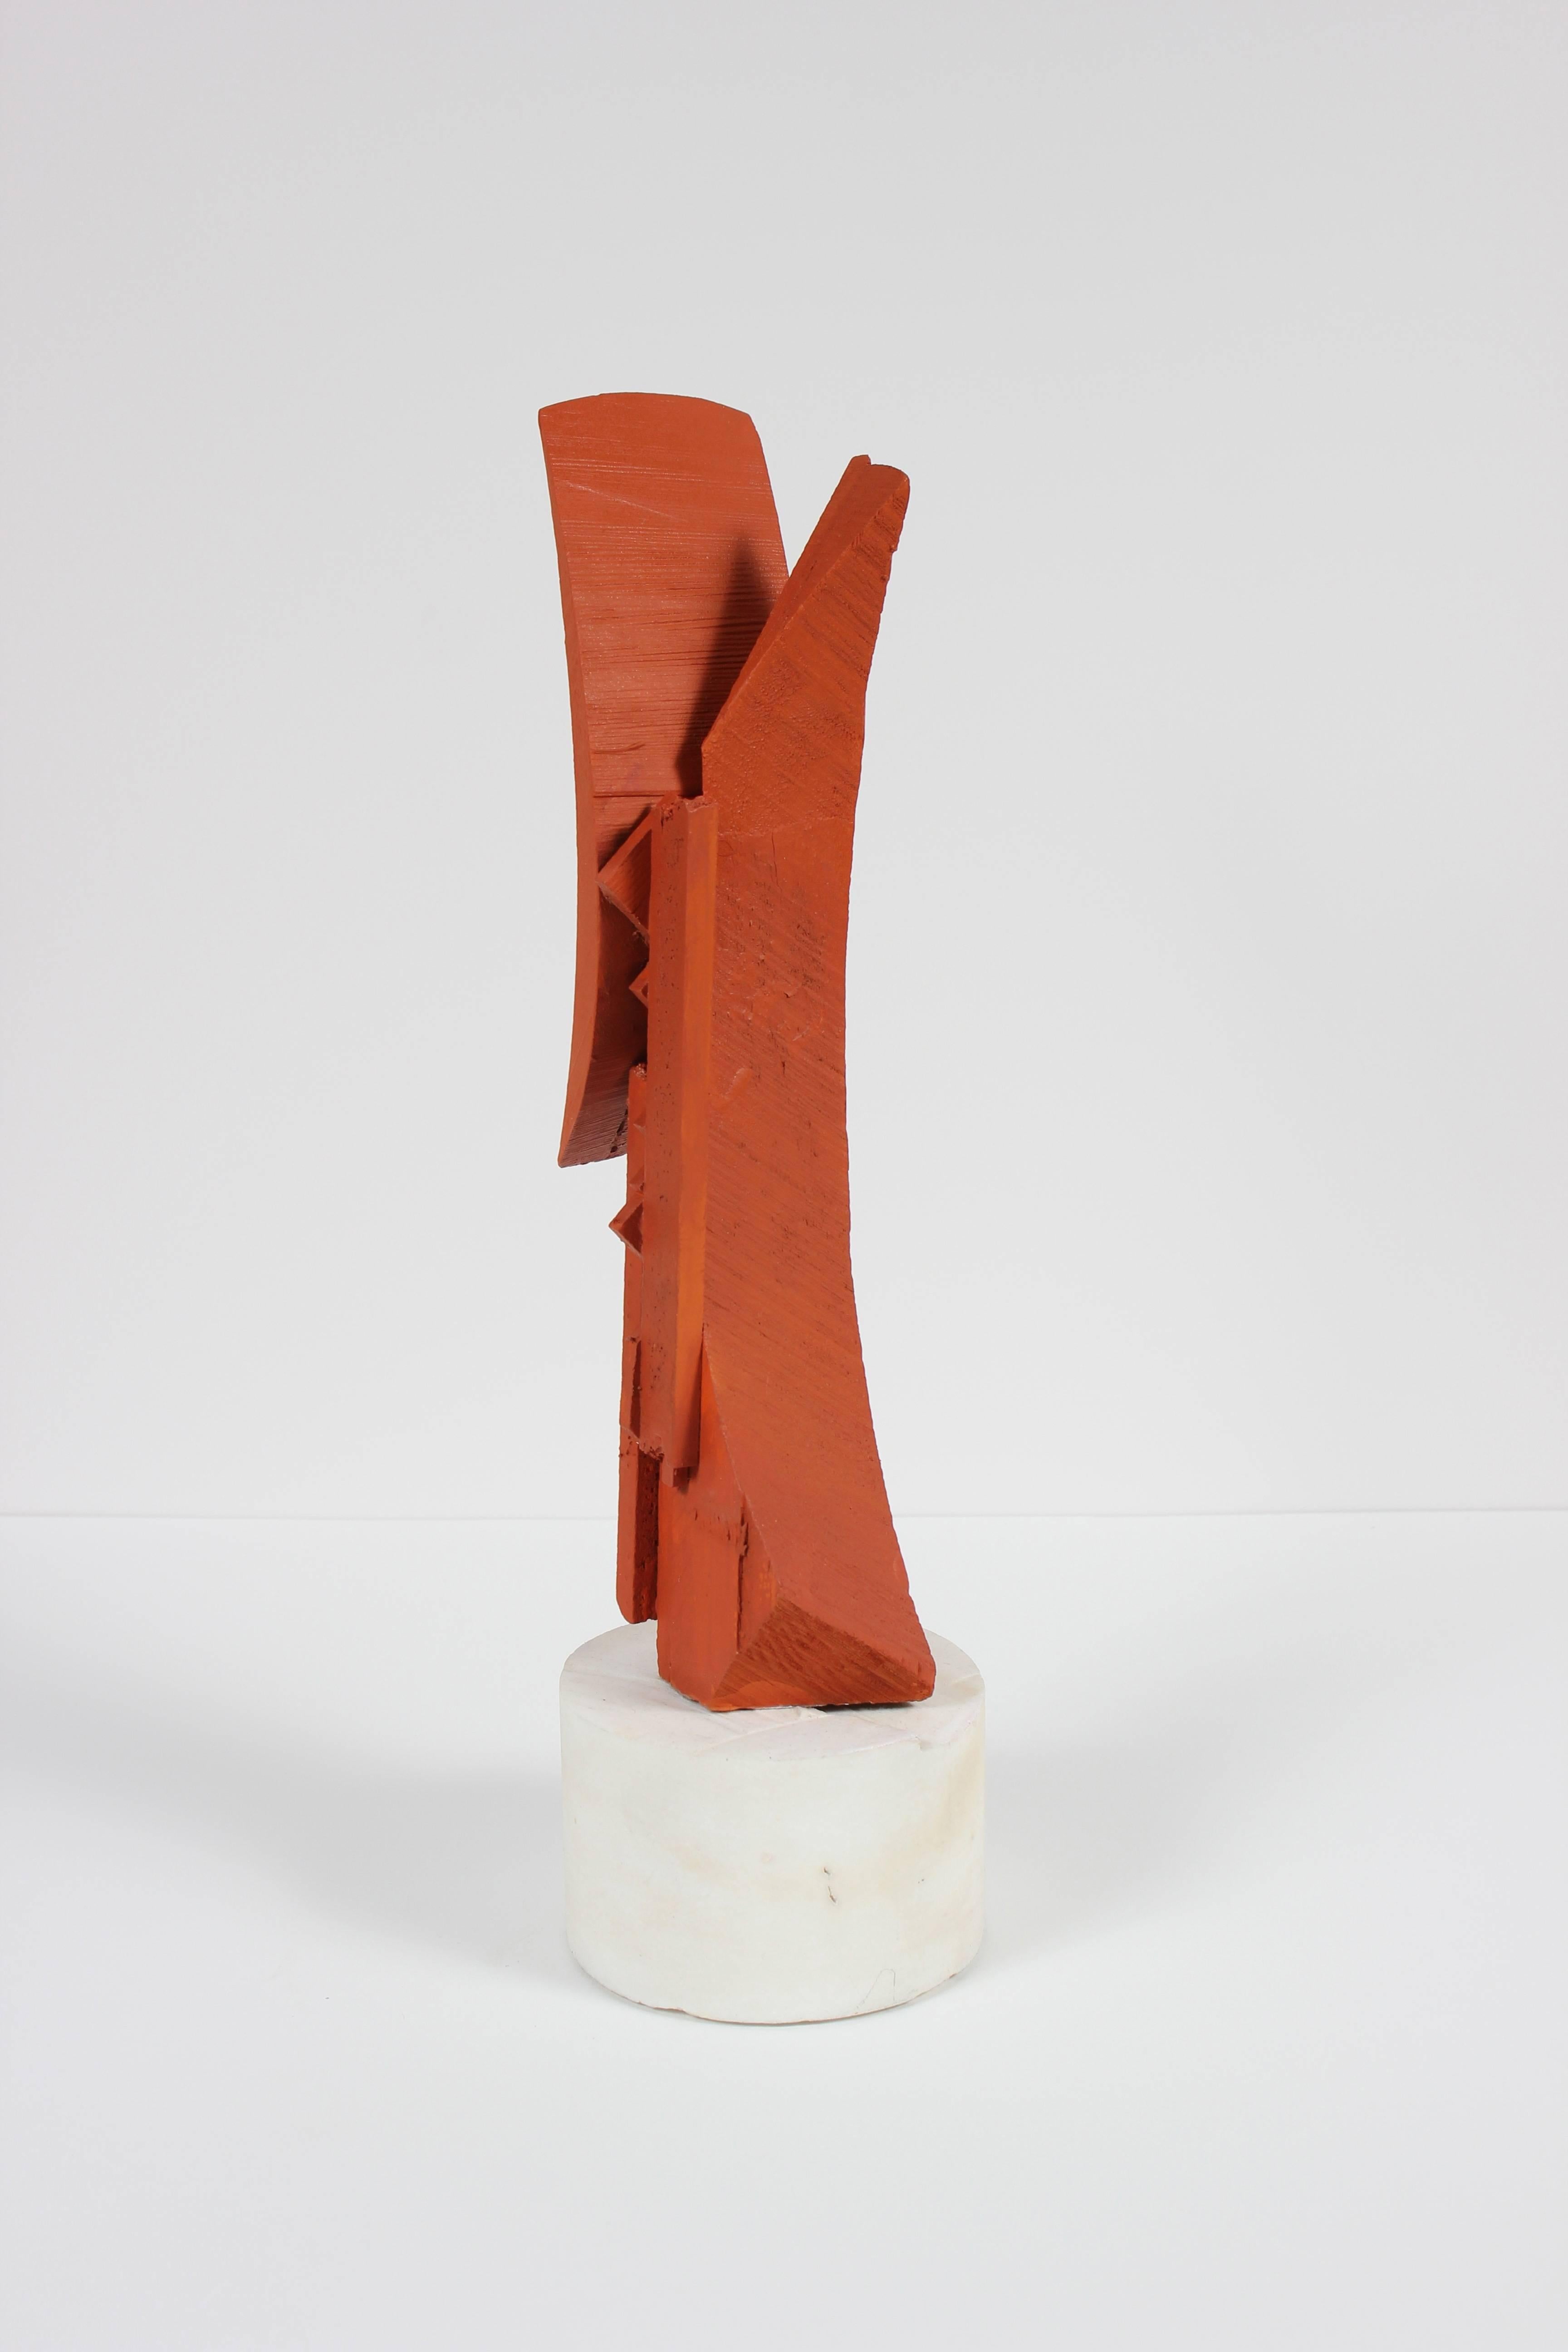 This mid 20th century painted wood sculpture affixed to a marble base is by Bay Area painter, printmaker, and designer Calvin Anderson (b. 1925).  He studied at CCAC and Art Center College in the 1940s and worked as a commercial art director in San